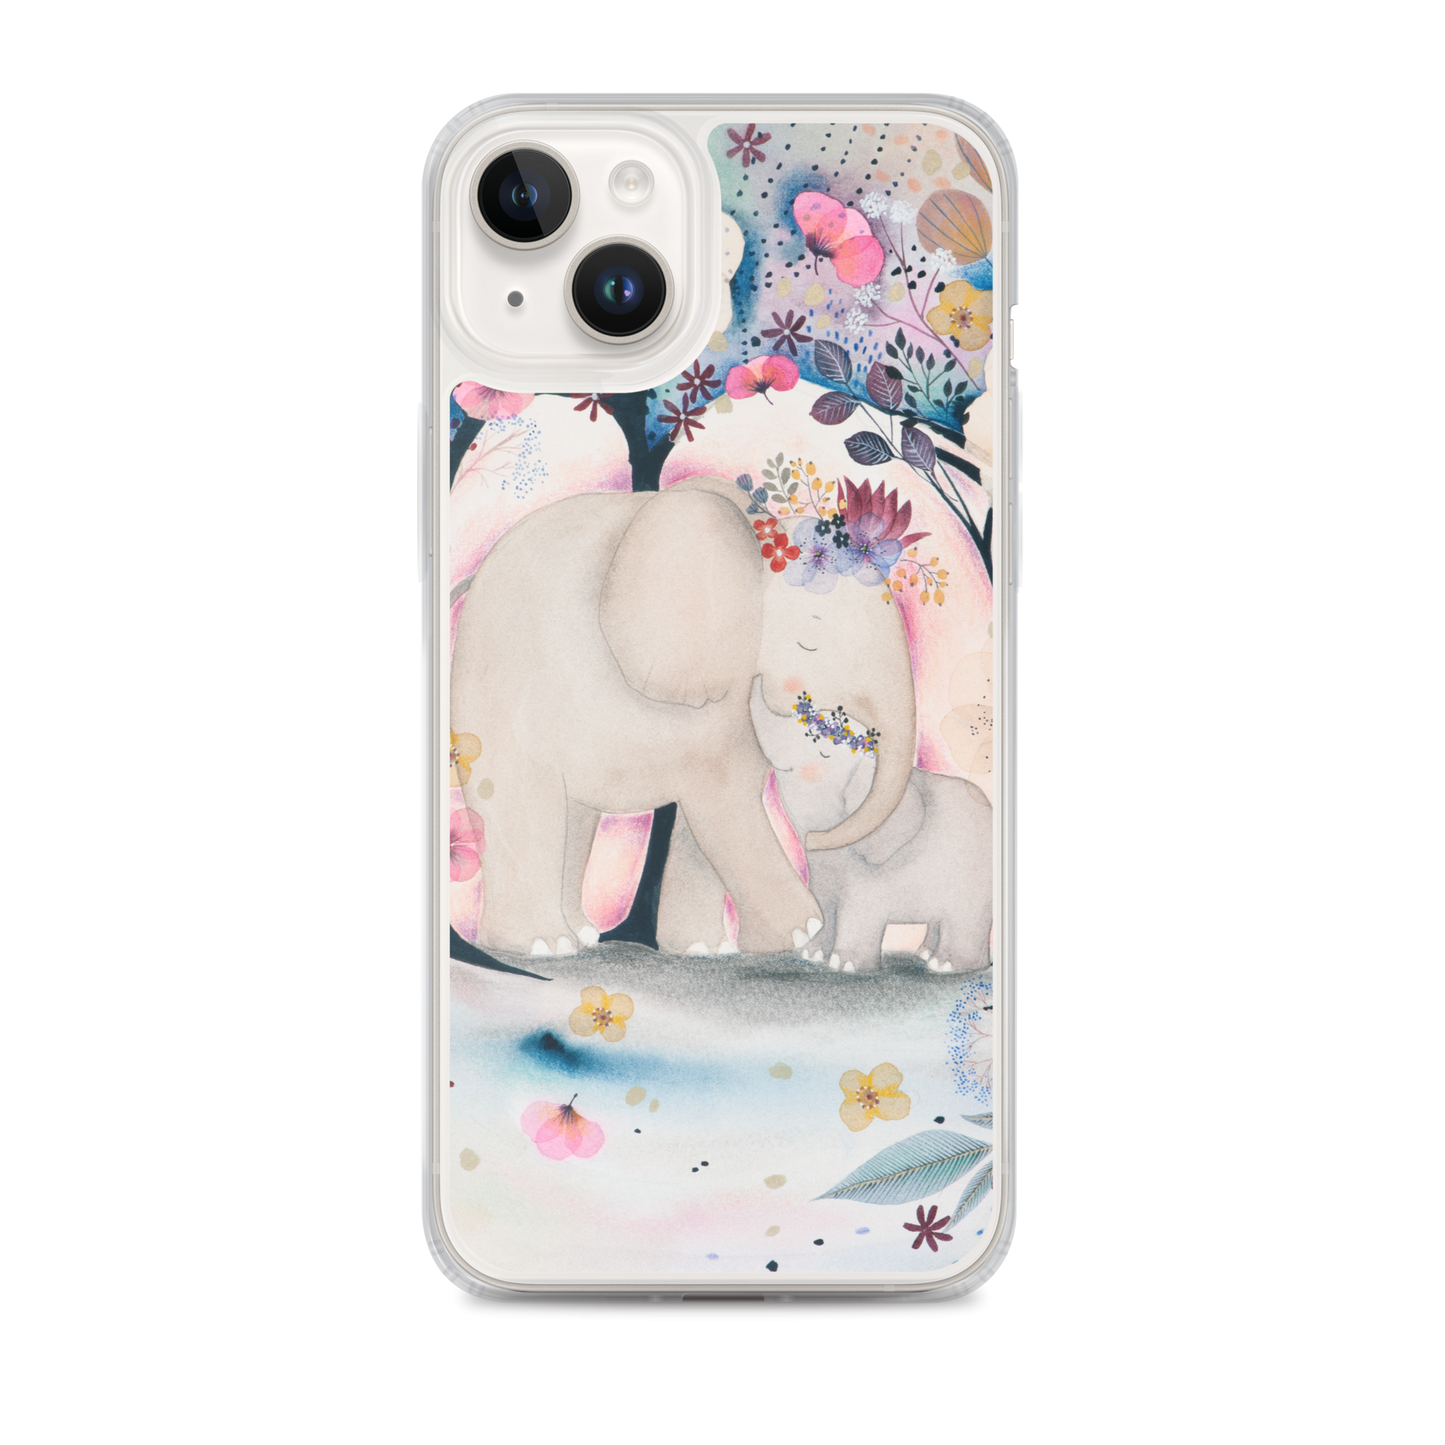 iPhone Case with Ethereal Baby Elephant Princess Illustration and Flowers